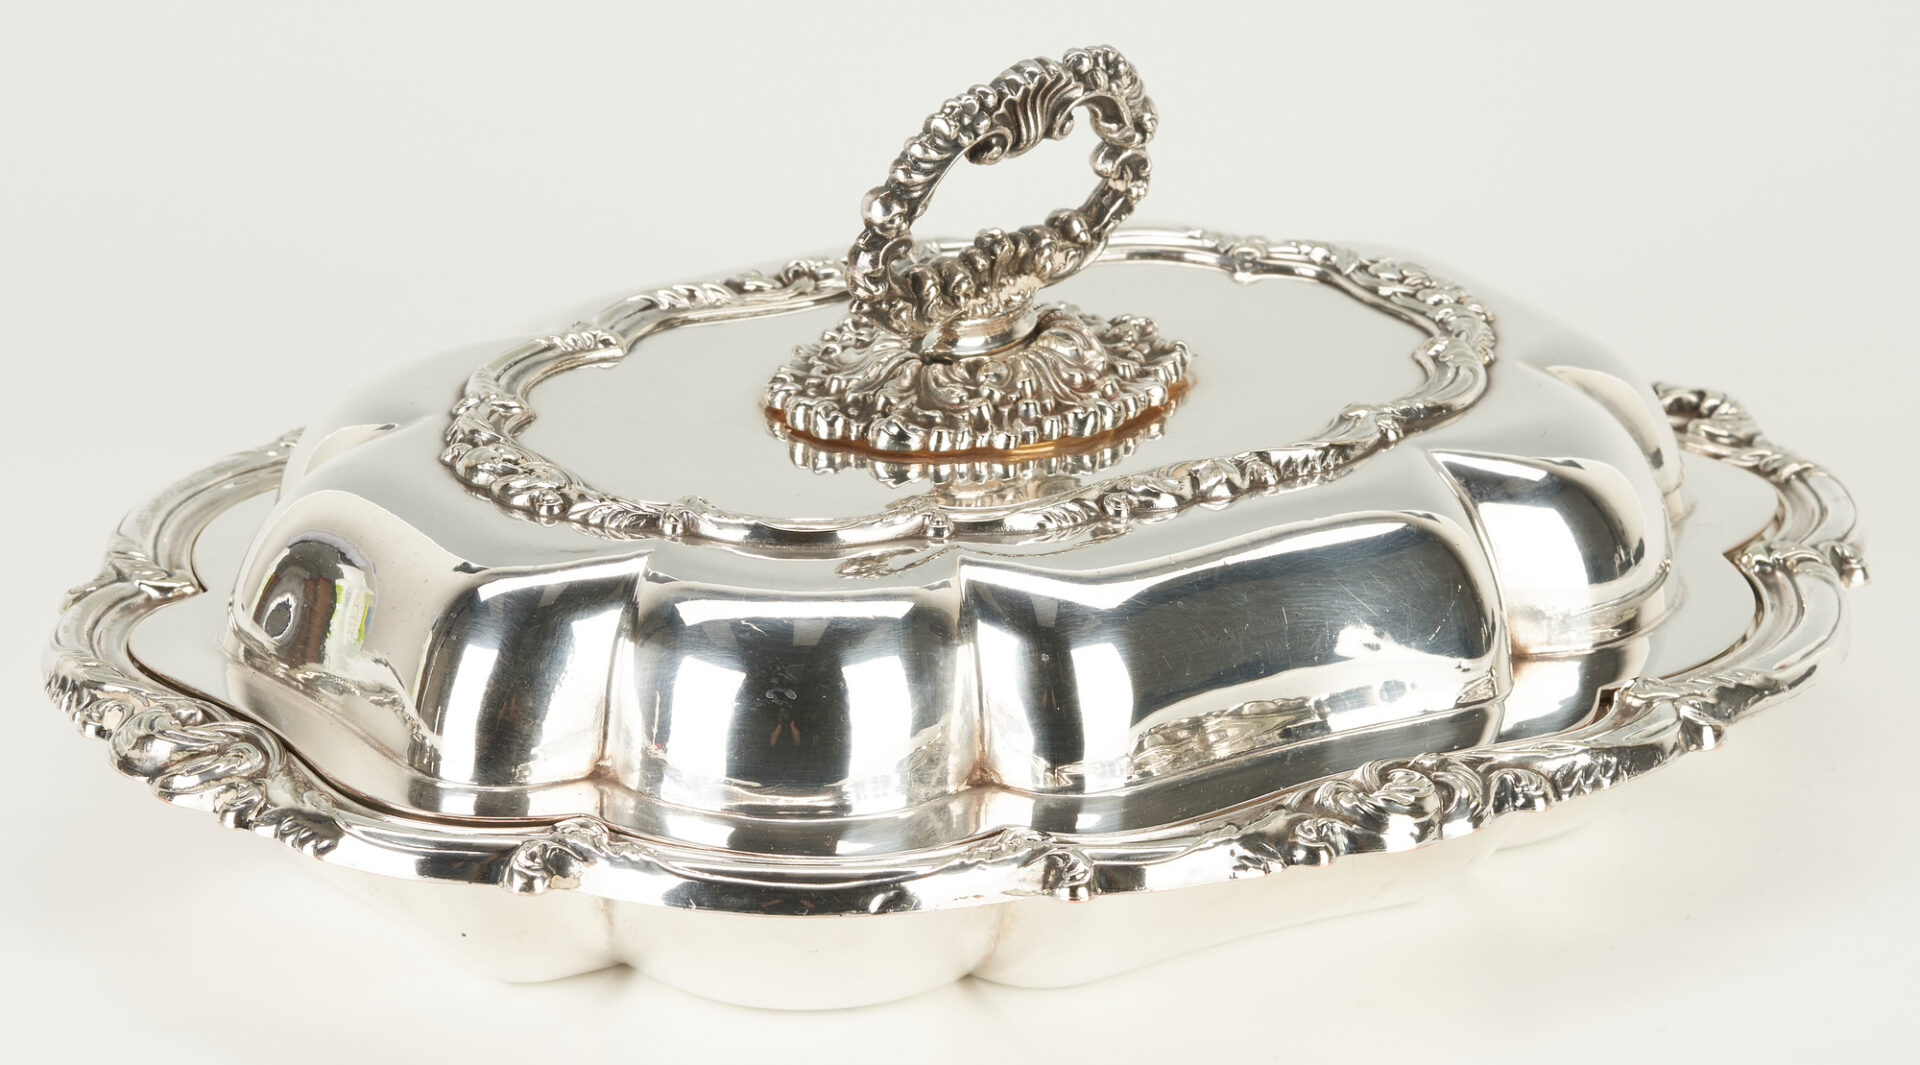 Lot 1209: 5 Pieces of English & American Silver Plated Hollowware